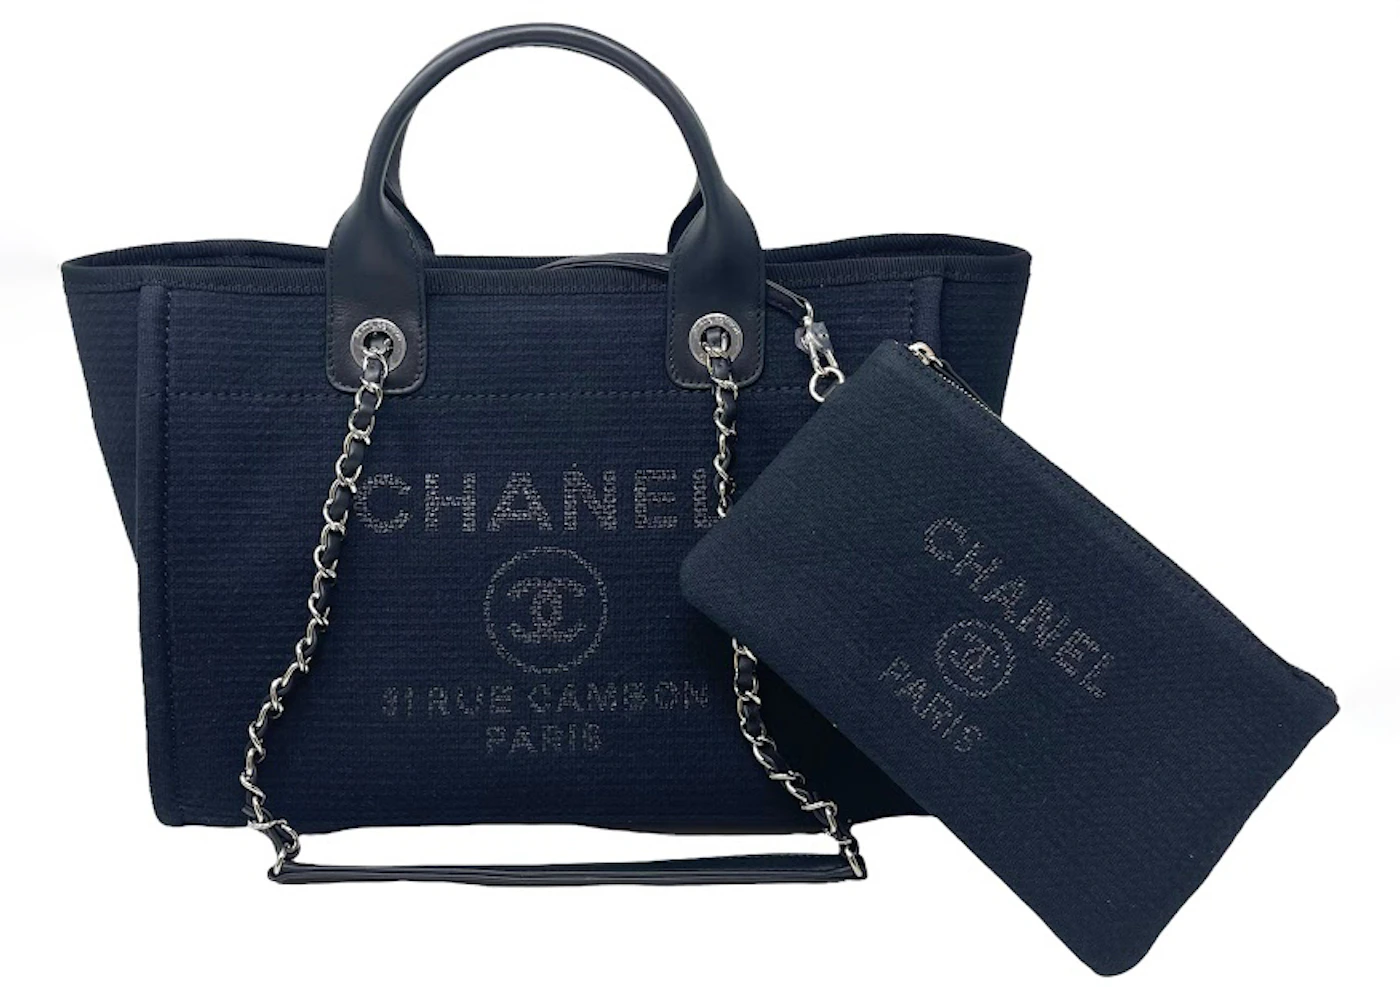 Chanel Deauville Medium Tote in Black Calfskin Vernice with Shiny Silver  Hardware - New - SOLD